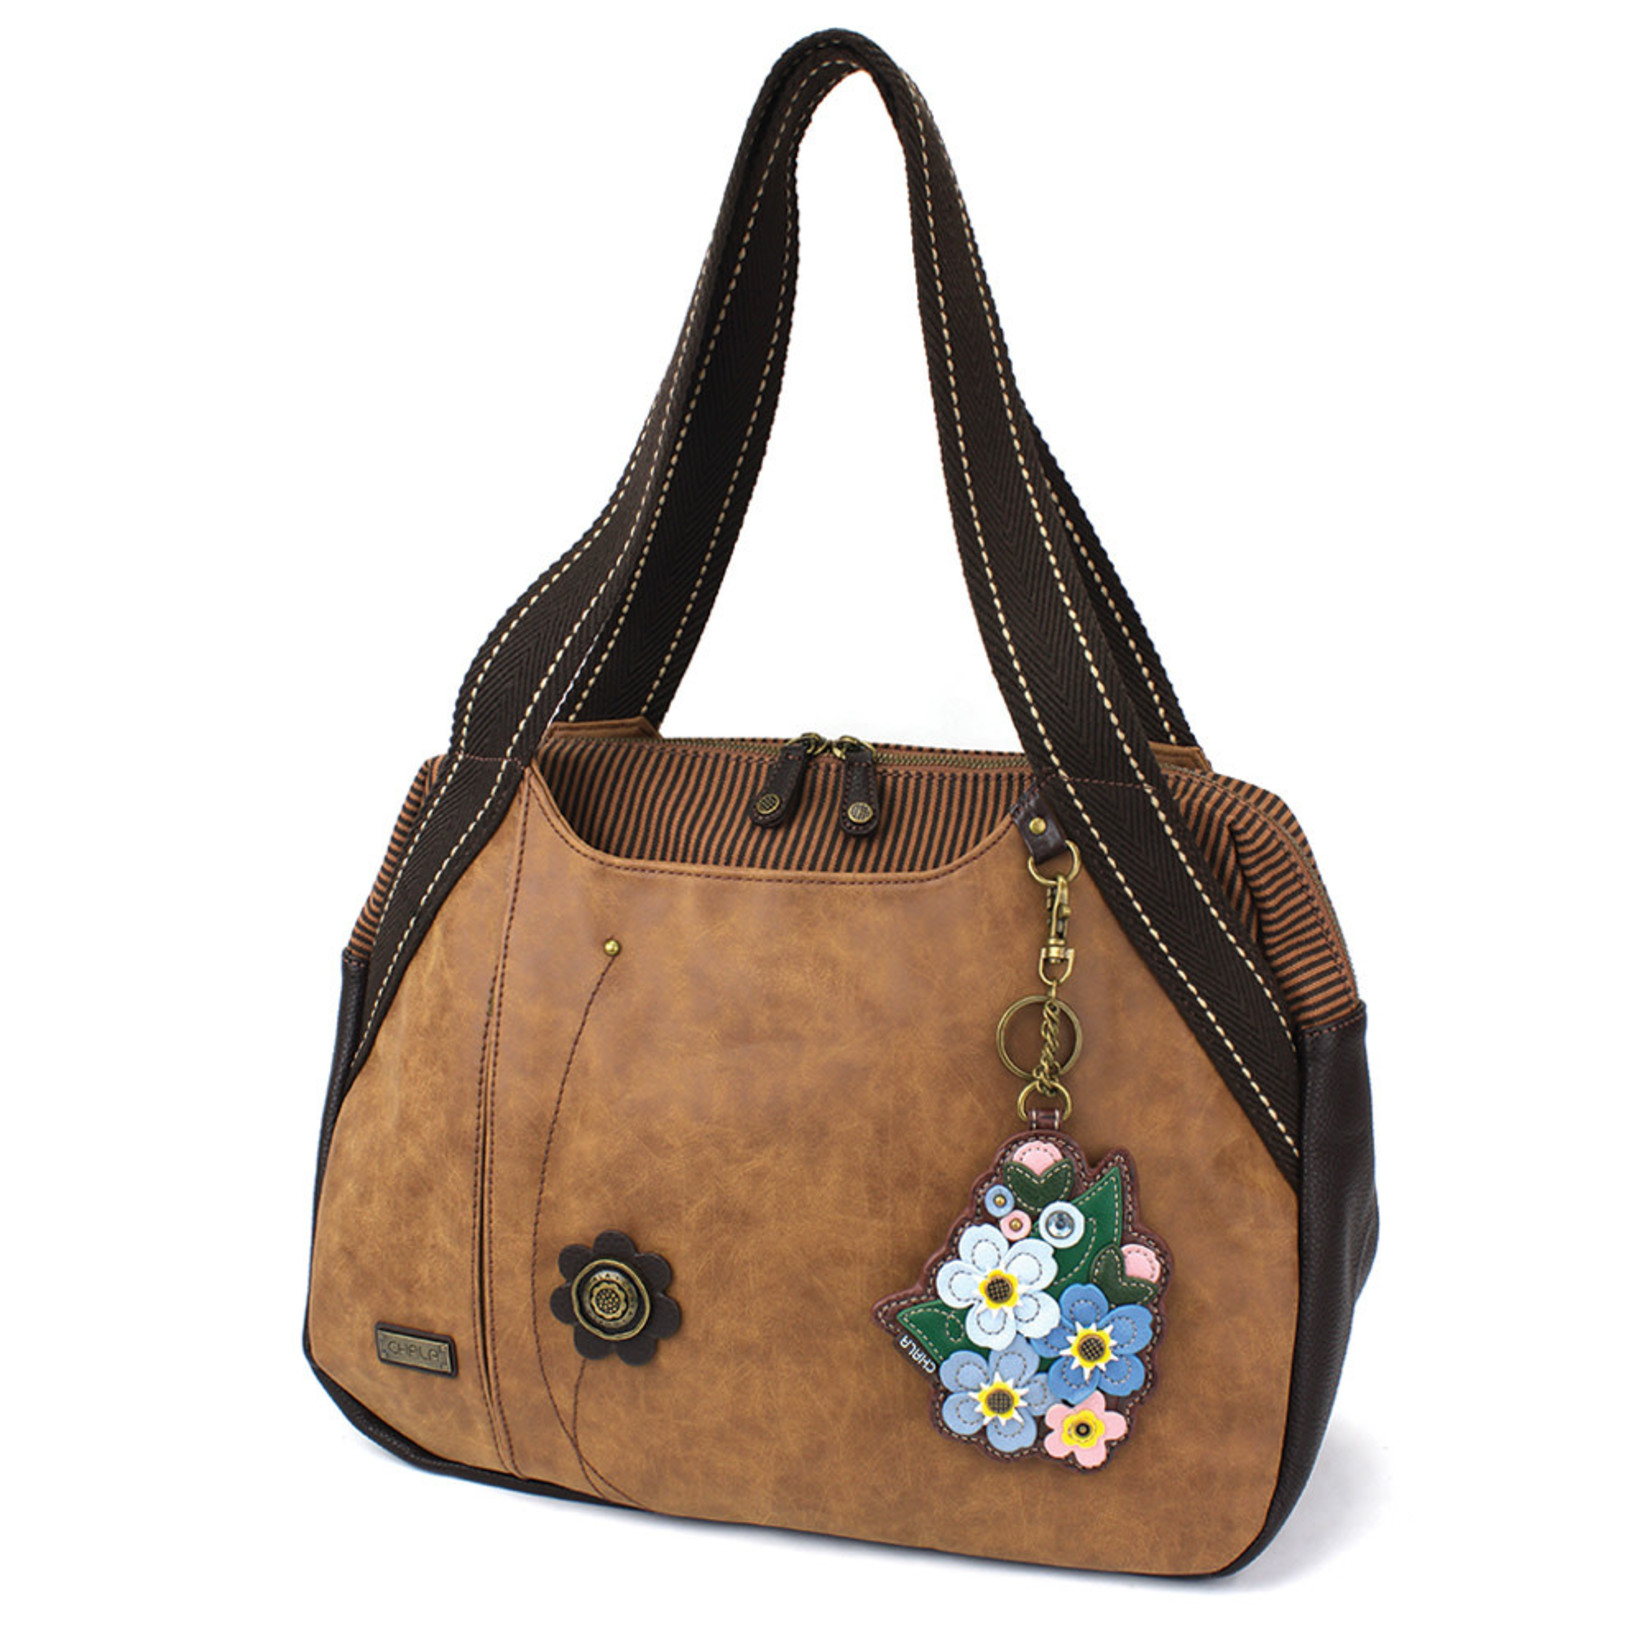 Chala Bowling Bag - Forget Me Not - Brown